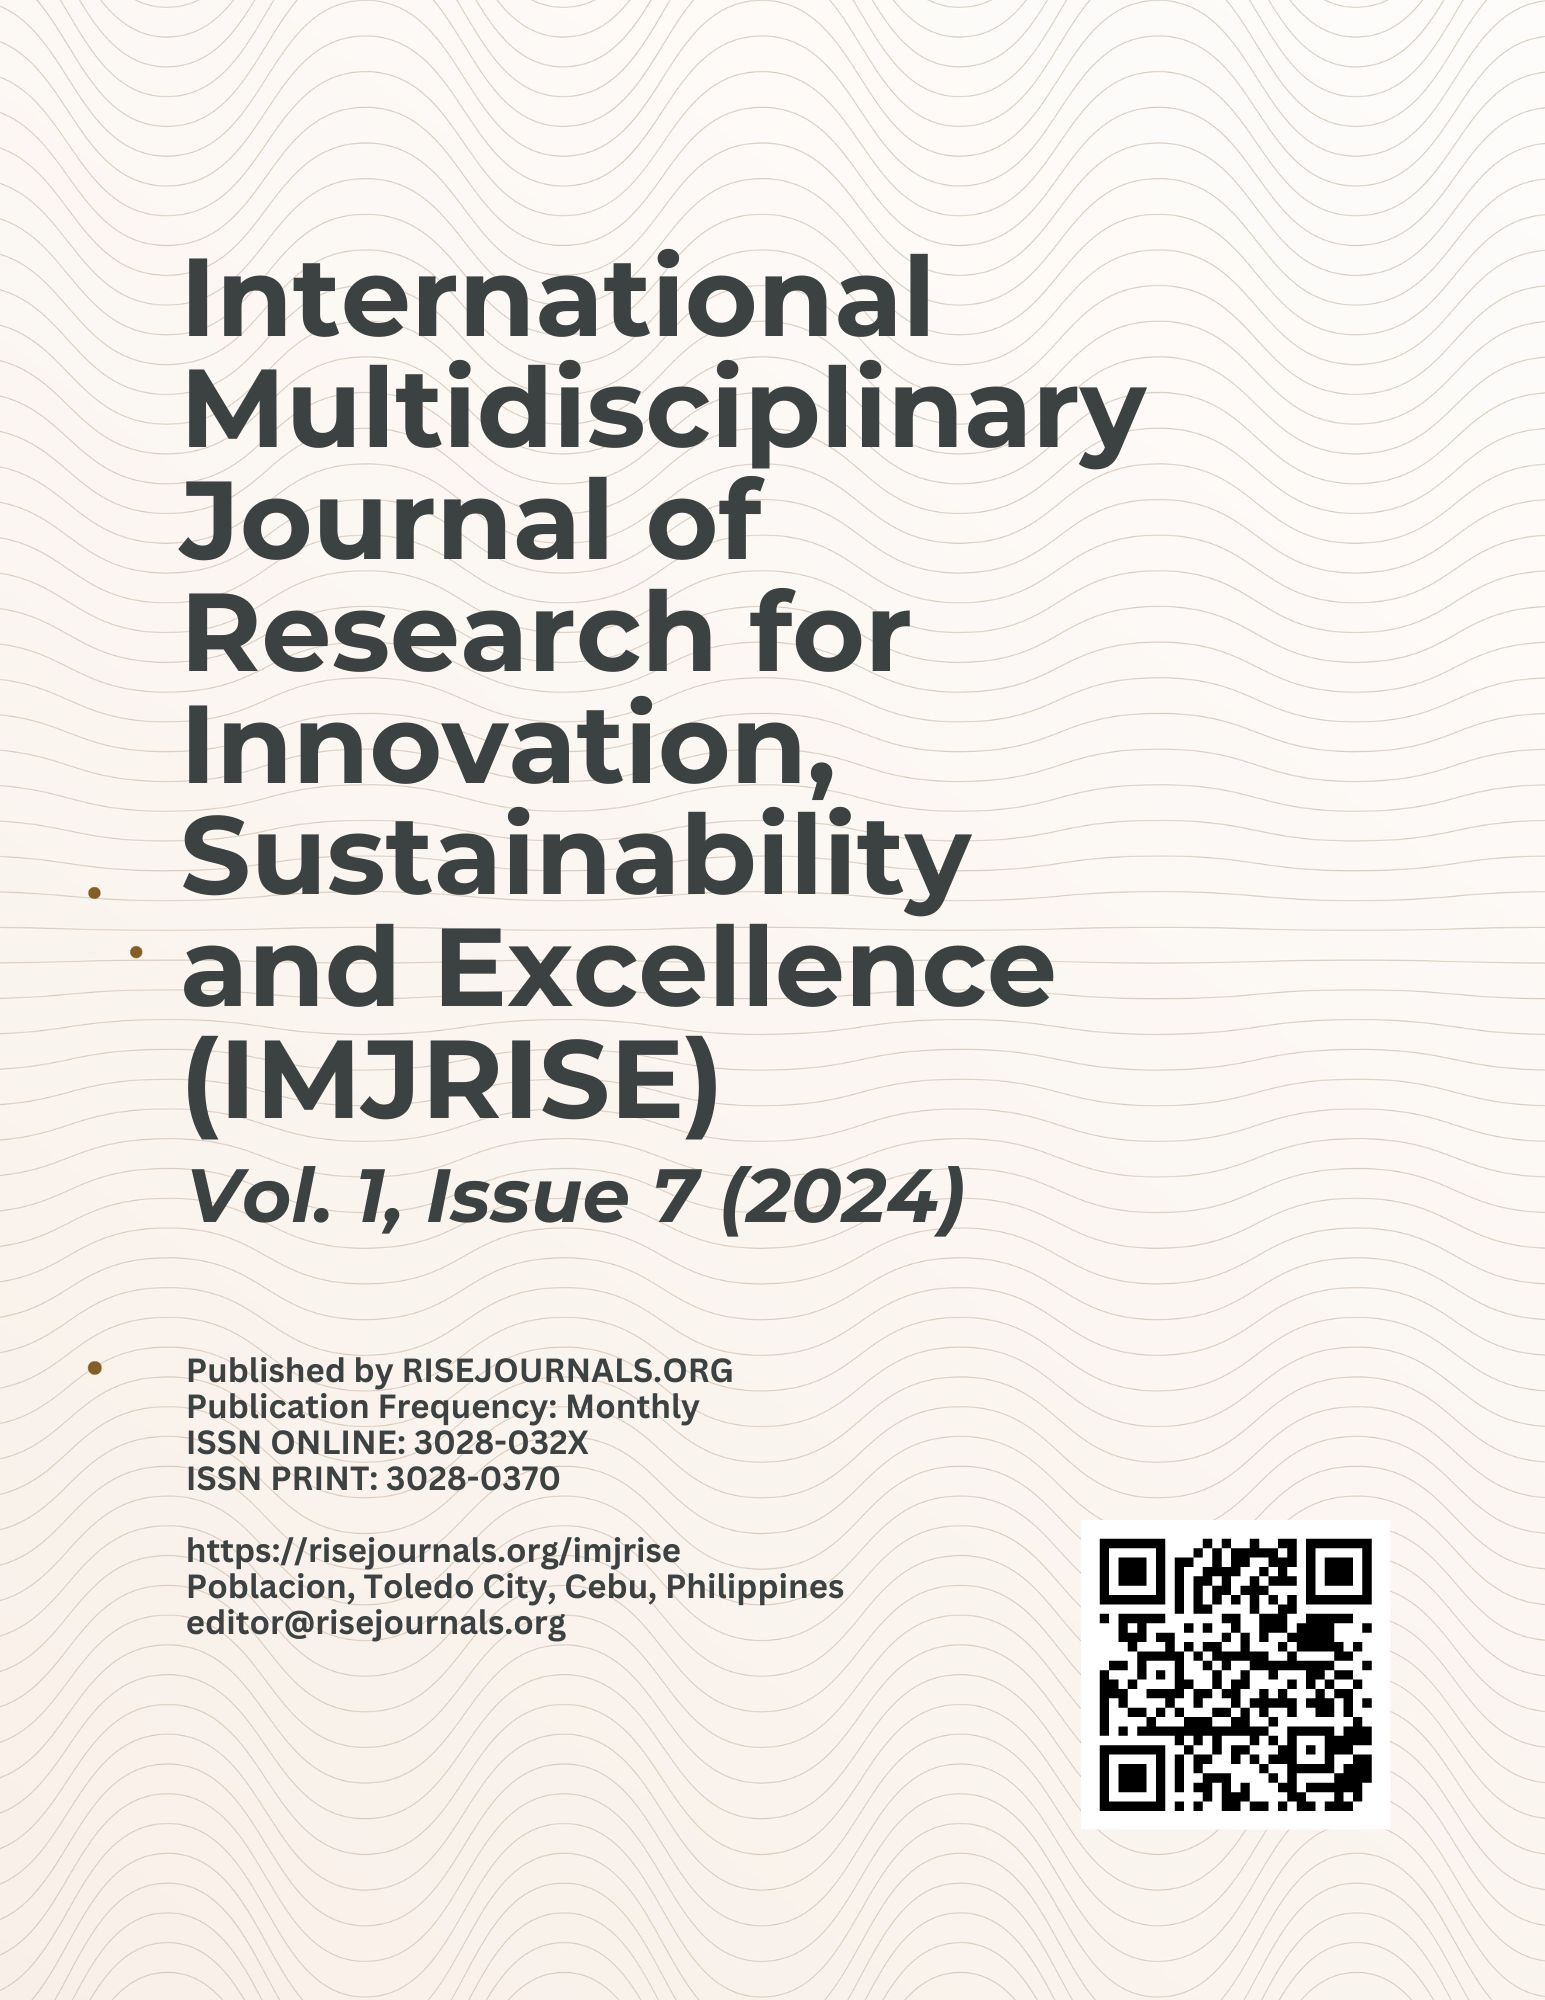 					View Vol. 1 No. 7 (2024): International Multidisciplinary Journal of Research for Innovation, Sustainability, and Excellence (IMJRISE)
				